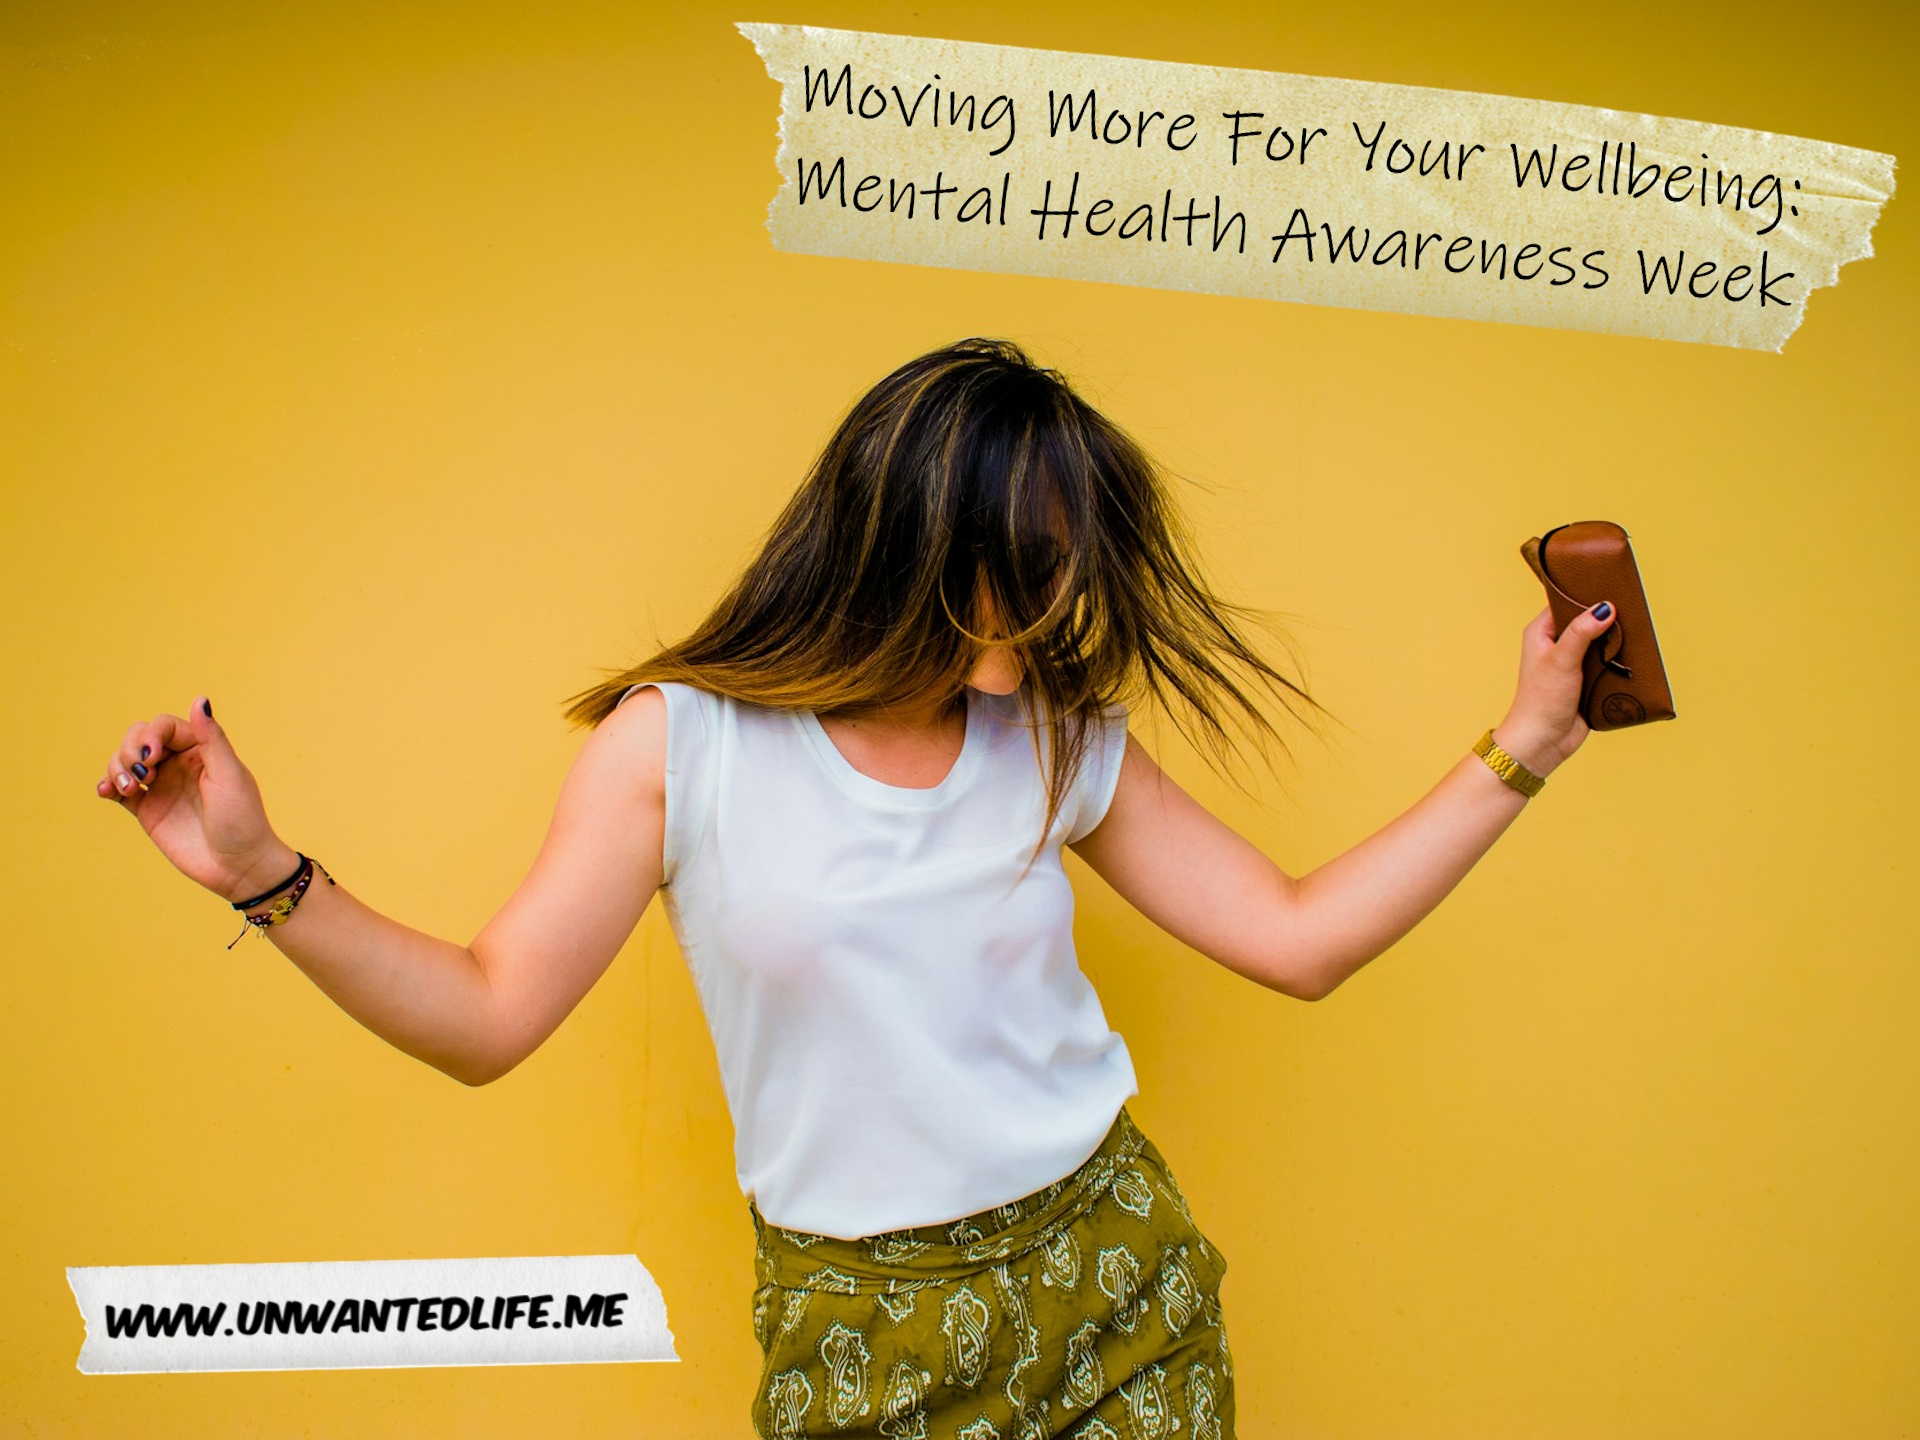 A White woman dancing to represent the topic of the article - Moving More For Your Wellbeing Mental Health Awareness Week